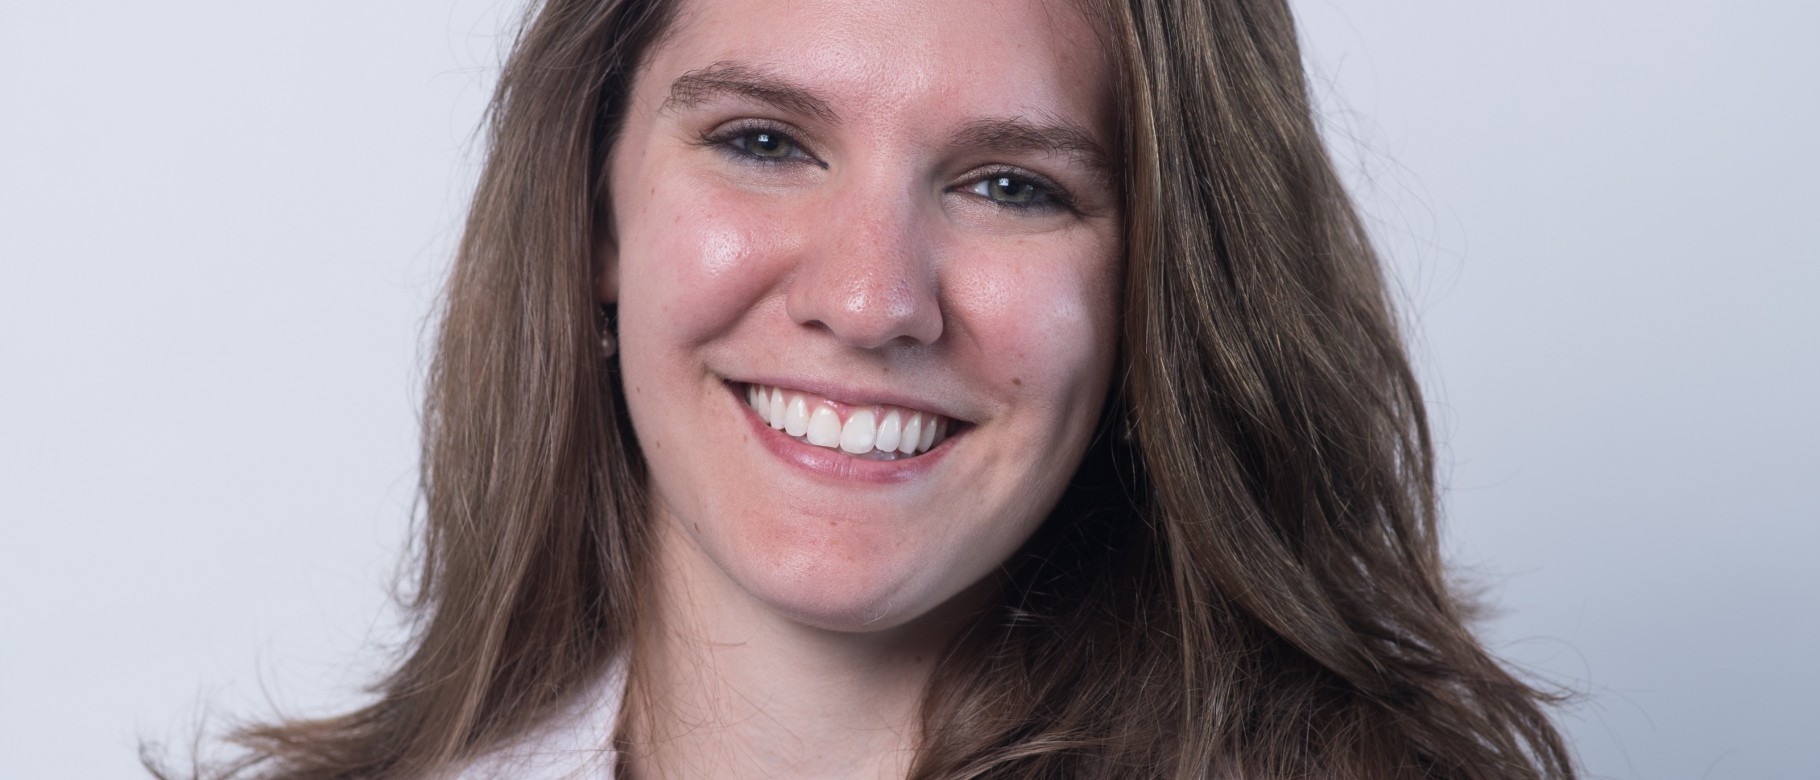 Emily Tamimie (D.O., ’22) receives James McKenney Student Travel Award from the Academy for Gerontology in Higher Education